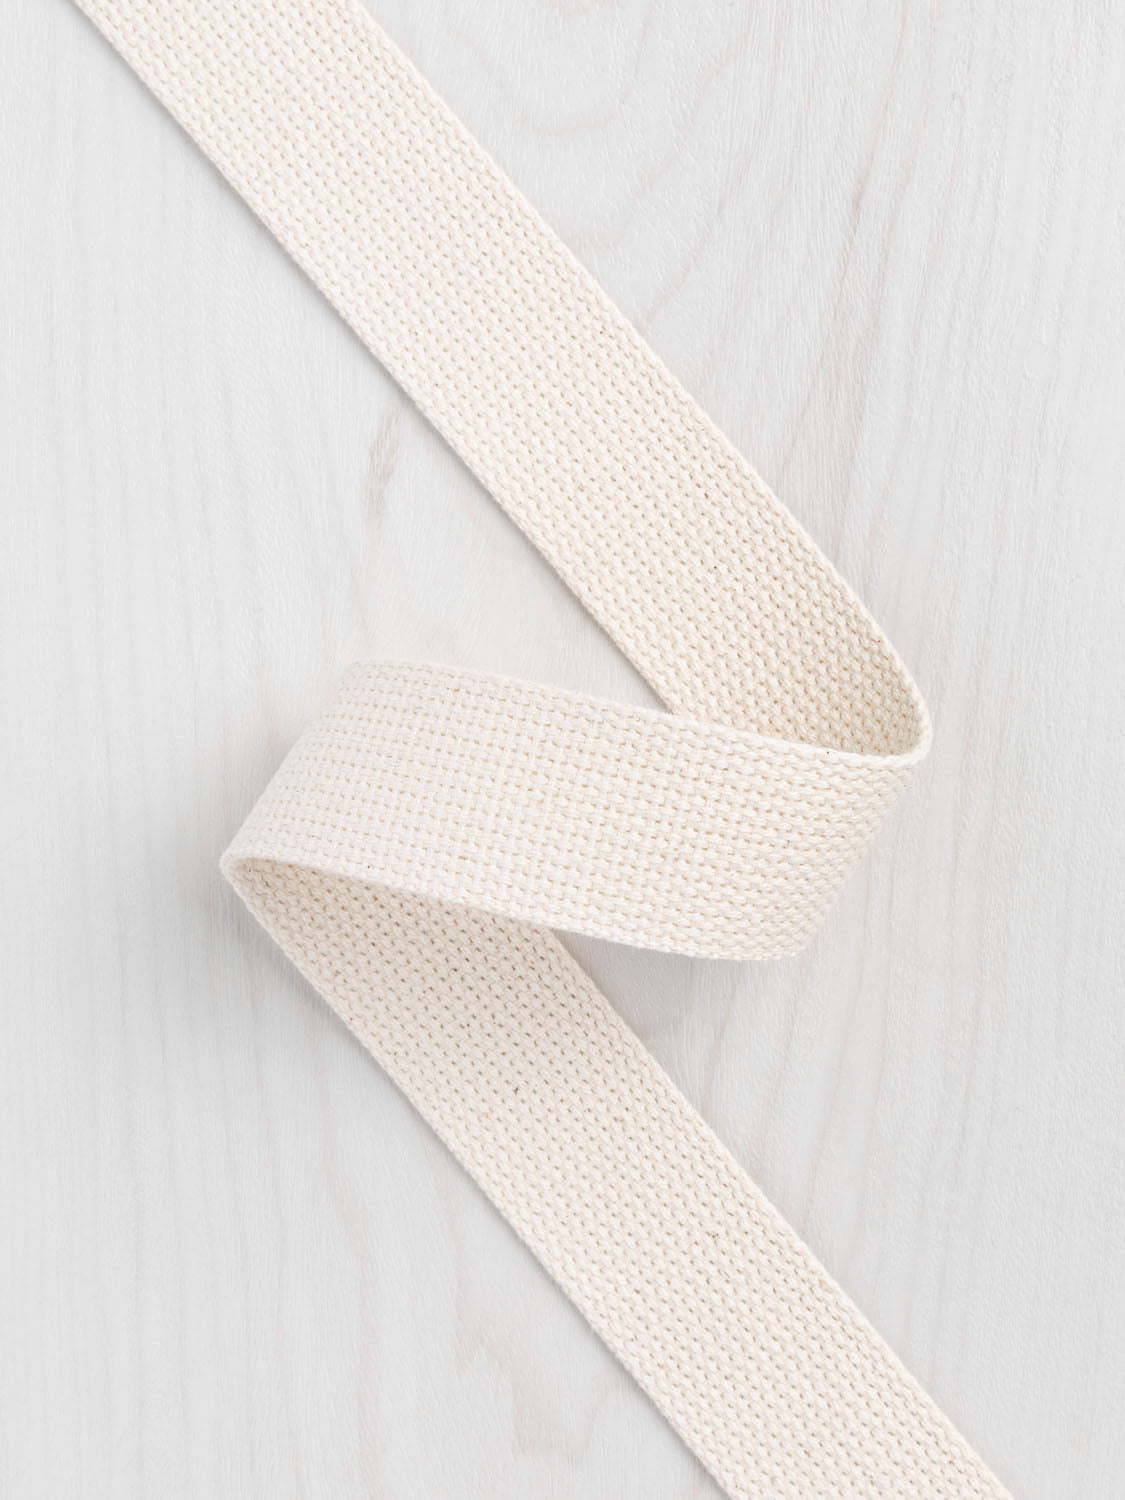 Great Deals On Flexible And Durable Wholesale 1.5 inch cotton webbing 